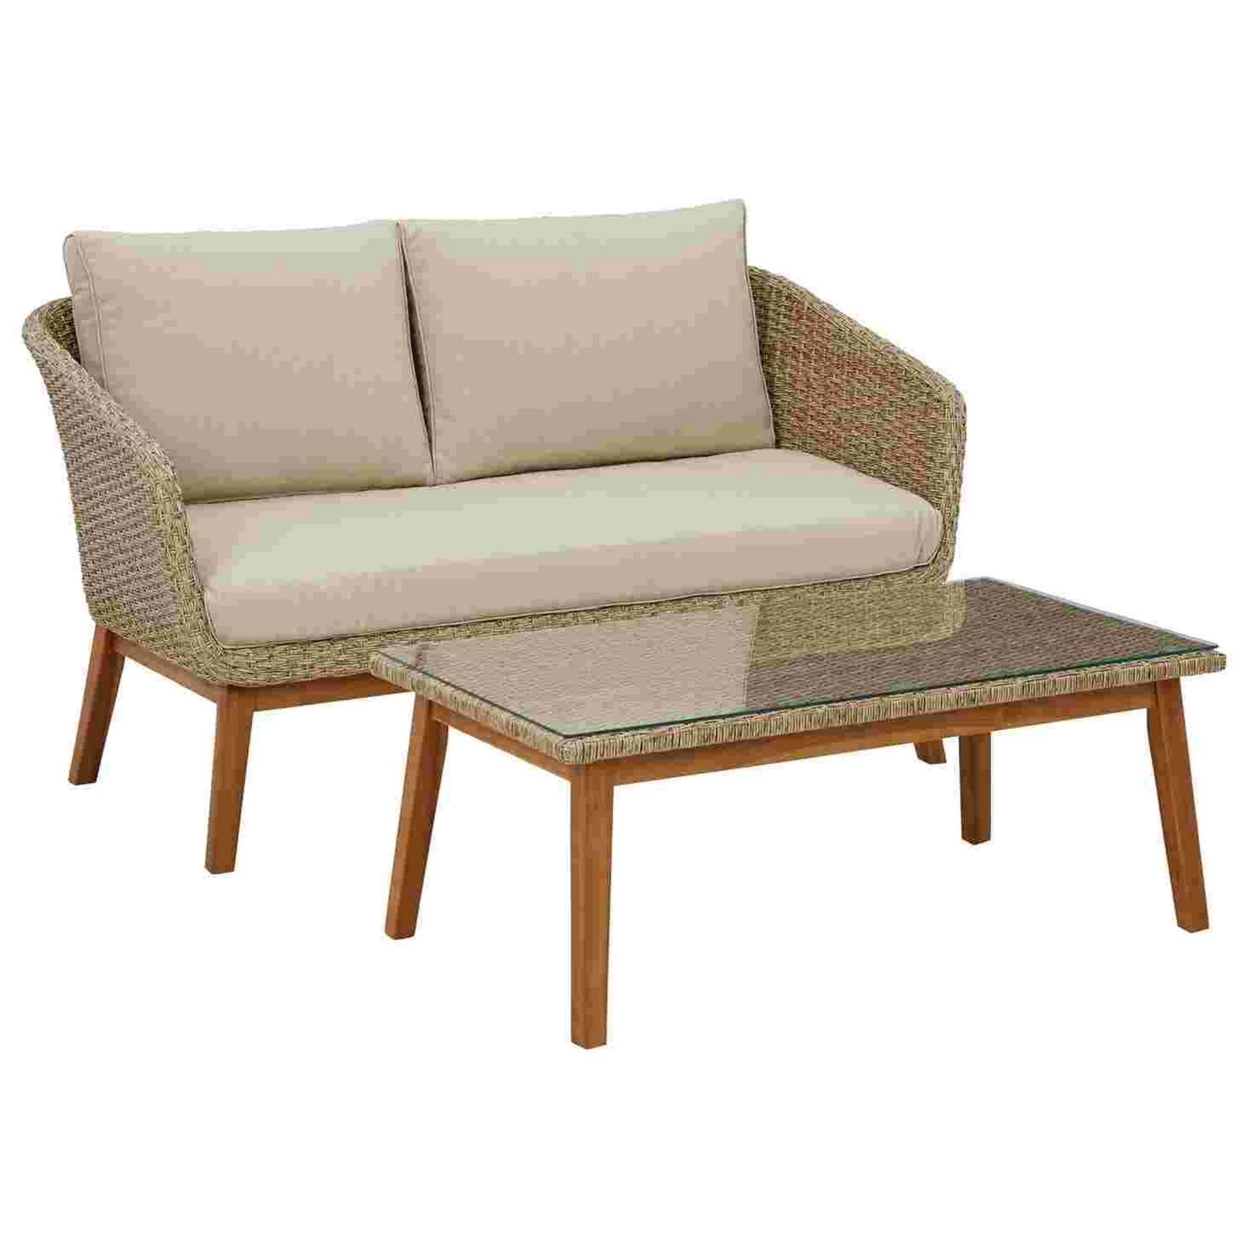 2 Piece Outdoor Loveseat And Table With Resin Wicker Wrapping, Brown- Saltoro Sherpi